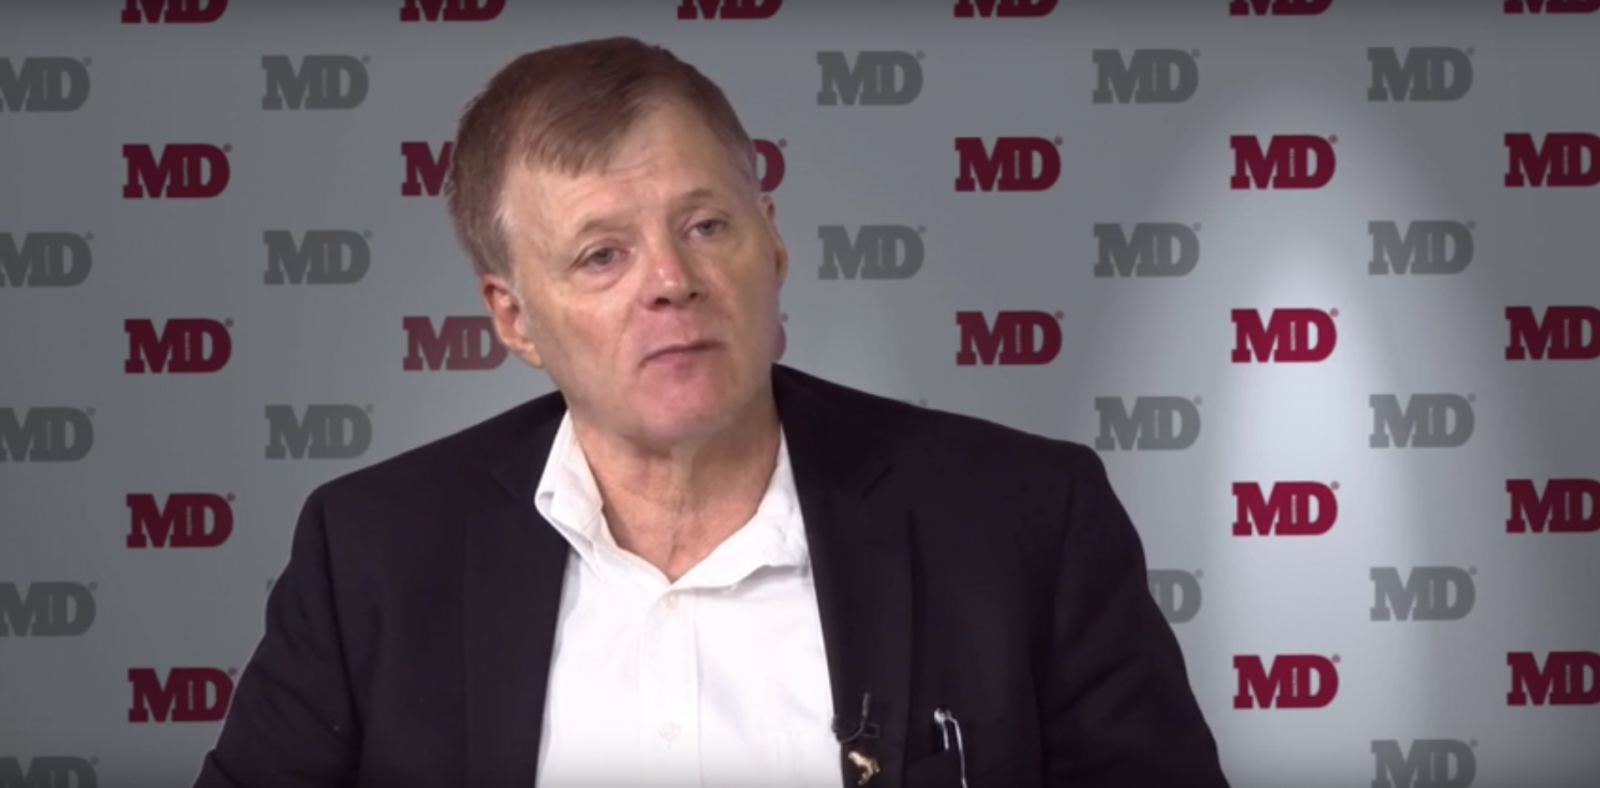 Simon Murray, MD: Pediatric Peanut Allergies in a Real-World Setting